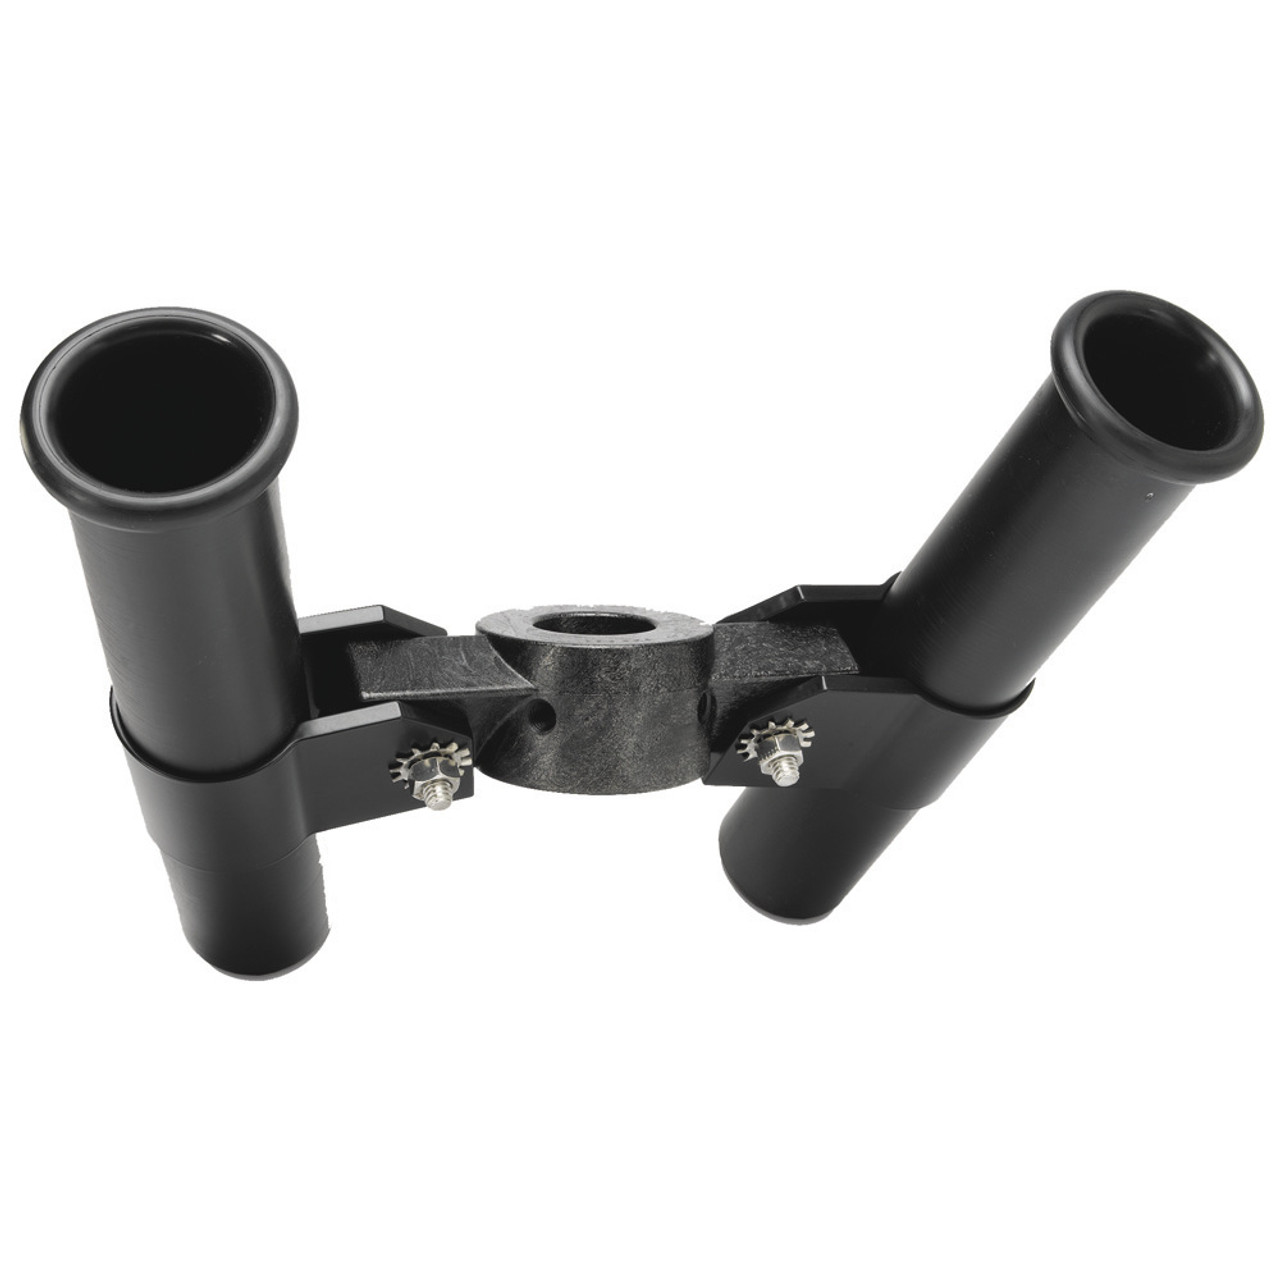 Cannon - Dual Rod Holder - Front Mount